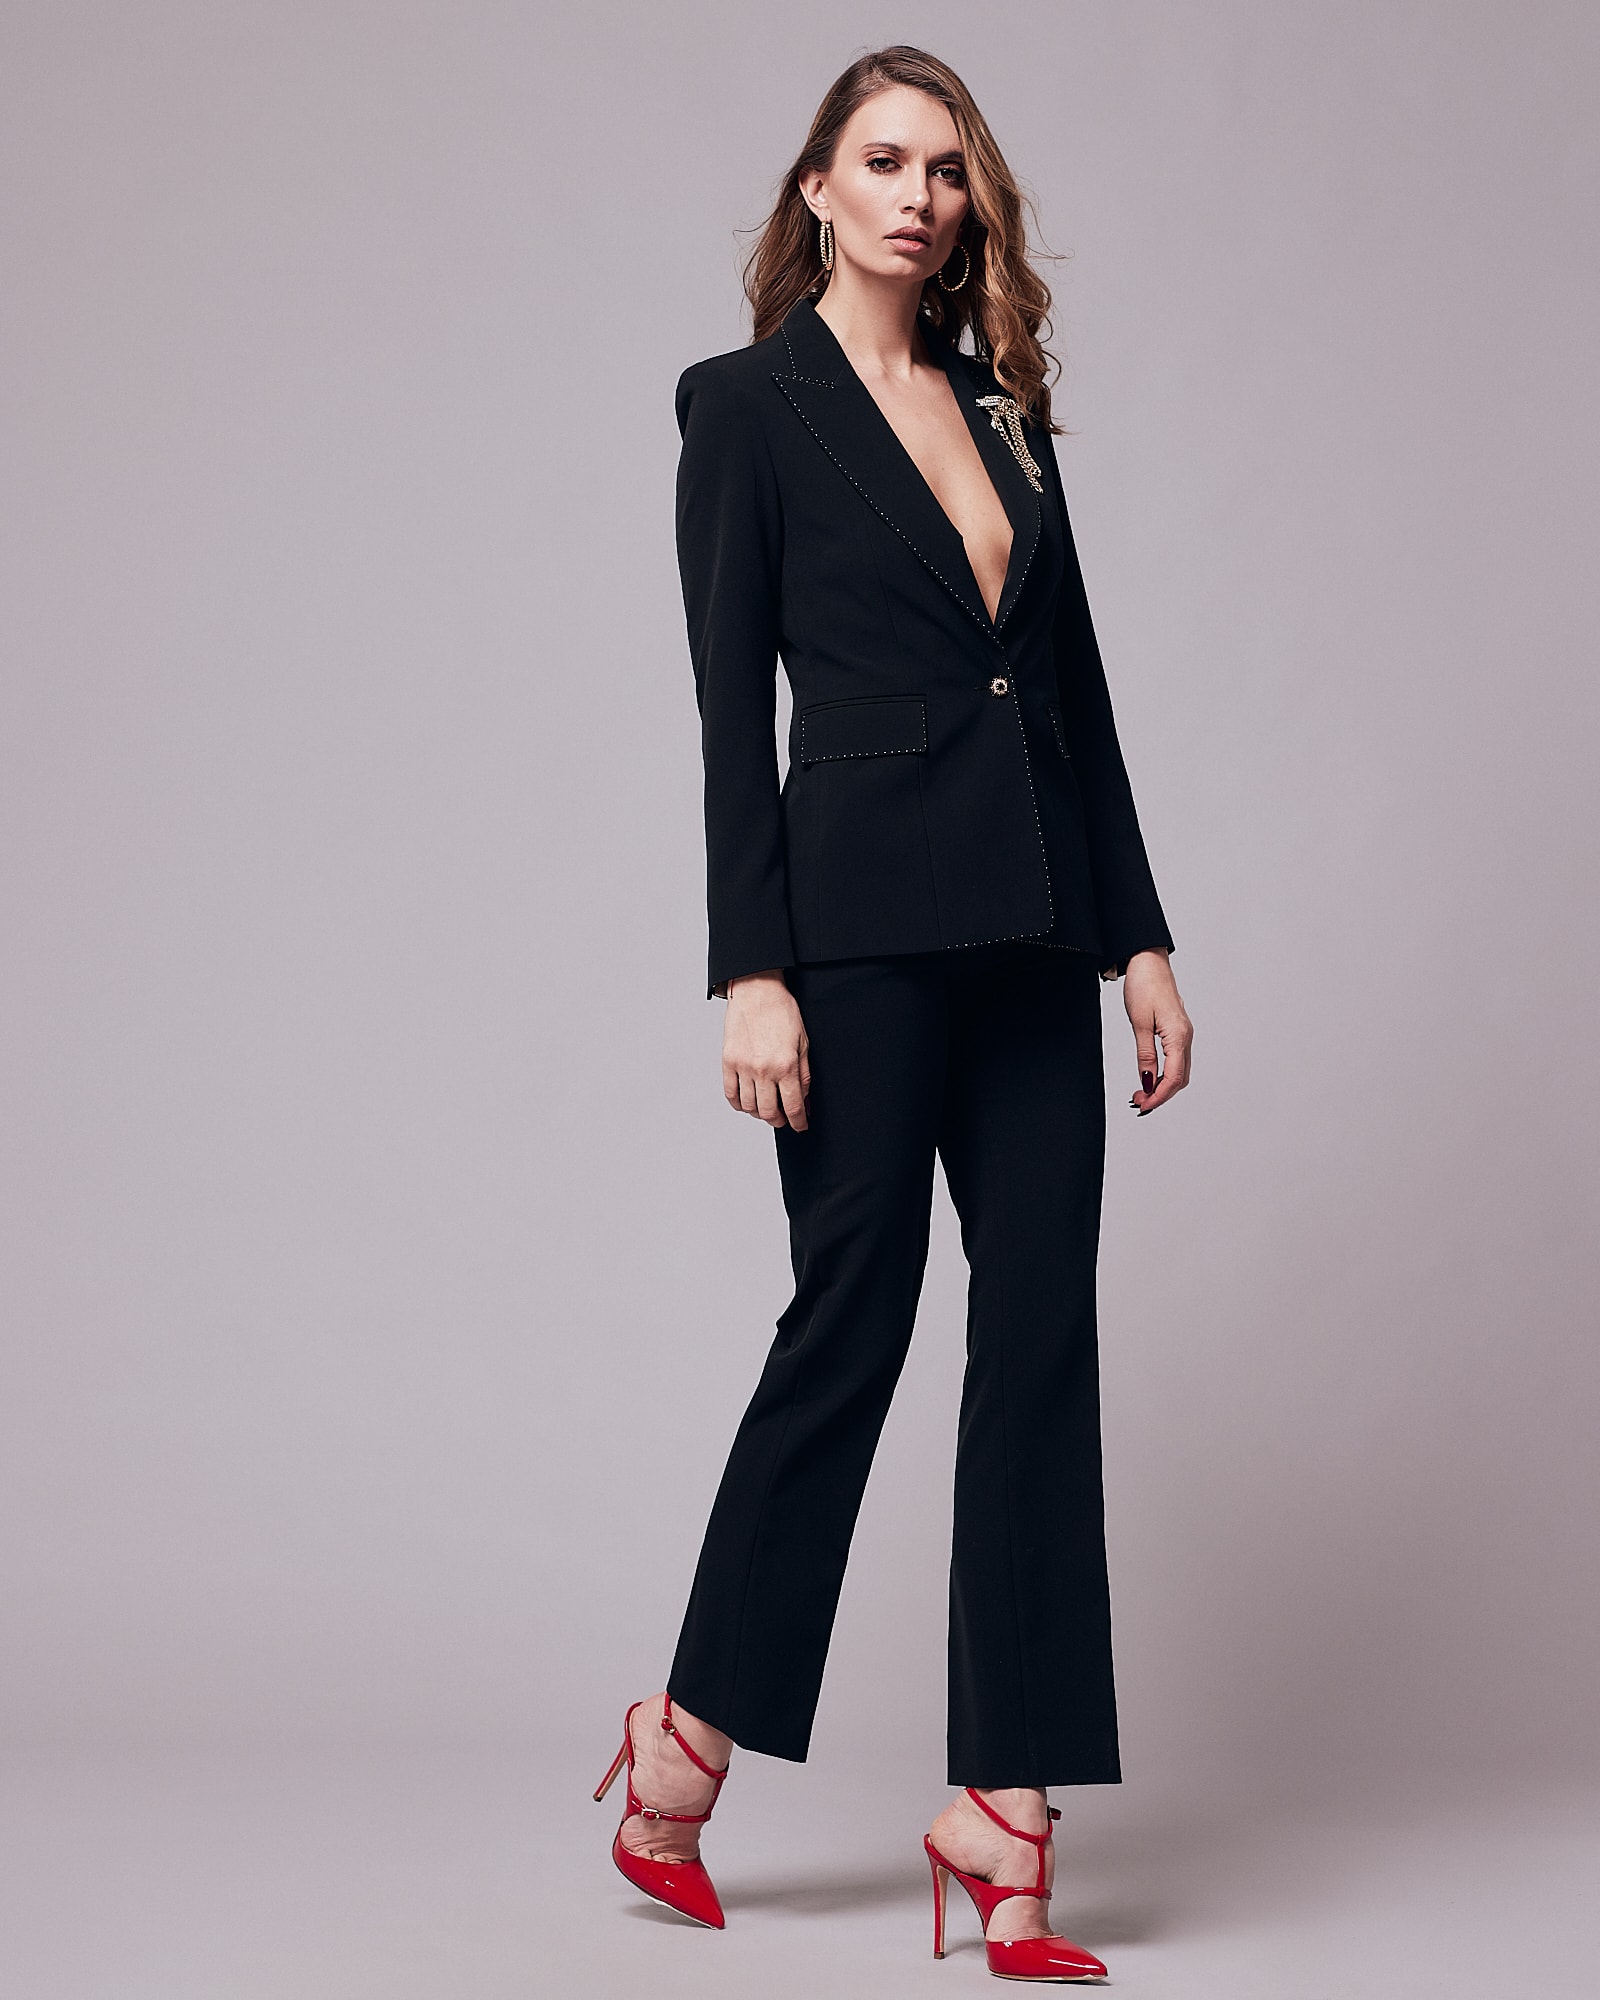 One button black suit with white stitching